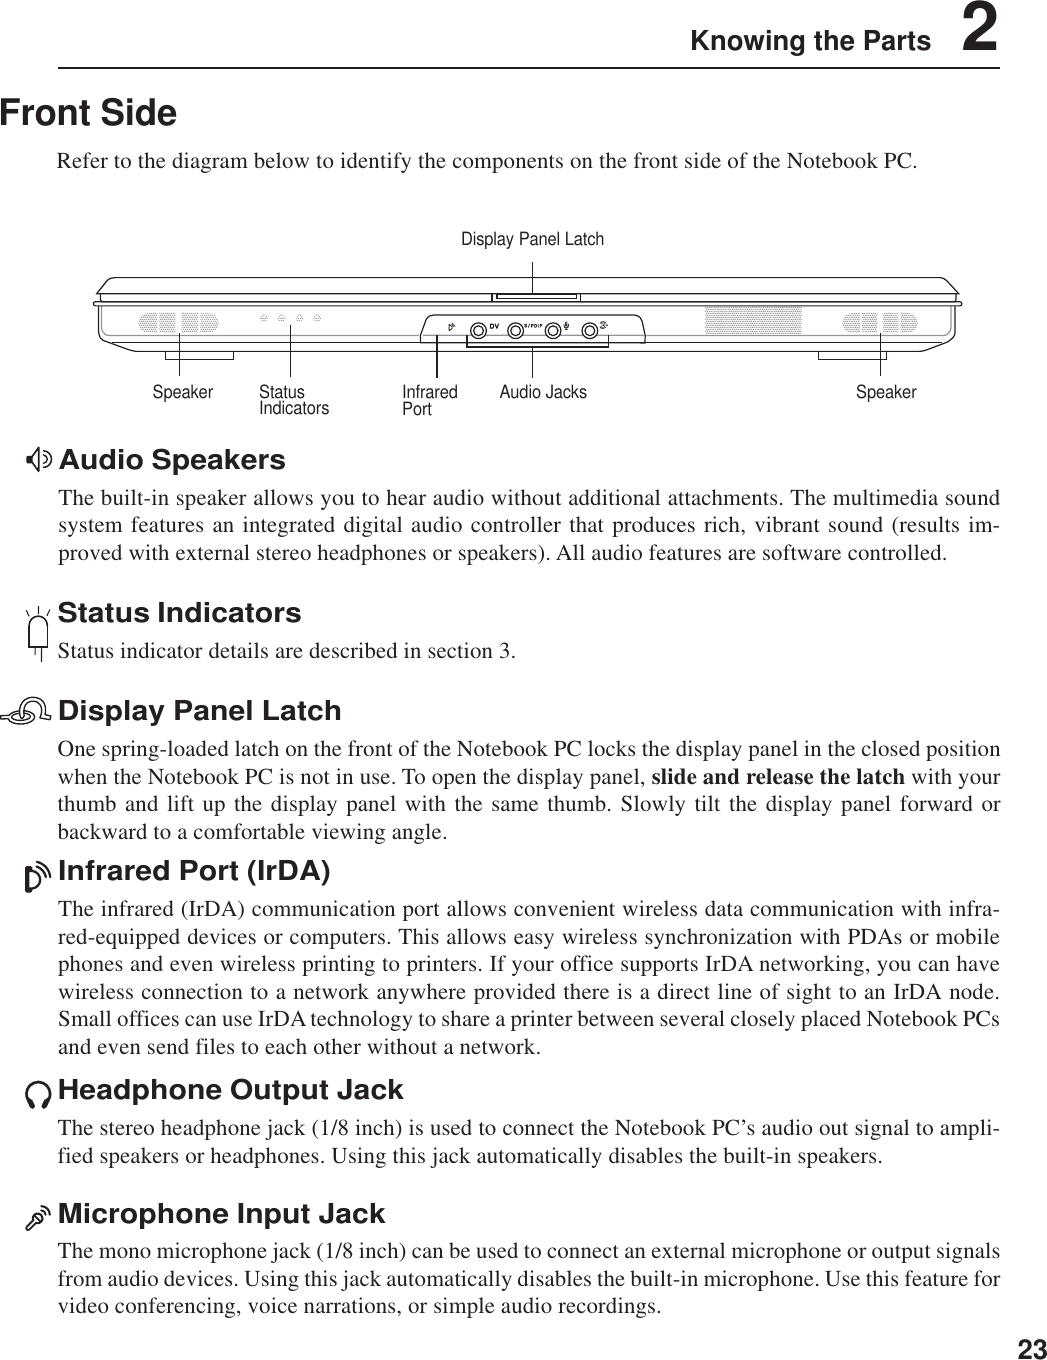 23Knowing the Parts    2Front SideRefer to the diagram below to identify the components on the front side of the Notebook PC.Display Panel LatchOne spring-loaded latch on the front of the Notebook PC locks the display panel in the closed positionwhen the Notebook PC is not in use. To open the display panel, slide and release the latch with yourthumb and lift up the display panel with the same thumb. Slowly tilt the display panel forward orbackward to a comfortable viewing angle.Status IndicatorsStatus indicator details are described in section 3.Infrared Port (IrDA)The infrared (IrDA) communication port allows convenient wireless data communication with infra-red-equipped devices or computers. This allows easy wireless synchronization with PDAs or mobilephones and even wireless printing to printers. If your office supports IrDA networking, you can havewireless connection to a network anywhere provided there is a direct line of sight to an IrDA node.Small offices can use IrDA technology to share a printer between several closely placed Notebook PCsand even send files to each other without a network.Microphone Input JackThe mono microphone jack (1/8 inch) can be used to connect an external microphone or output signalsfrom audio devices. Using this jack automatically disables the built-in microphone. Use this feature forvideo conferencing, voice narrations, or simple audio recordings.Headphone Output JackThe stereo headphone jack (1/8 inch) is used to connect the Notebook PC’s audio out signal to ampli-fied speakers or headphones. Using this jack automatically disables the built-in speakers.Audio SpeakersThe built-in speaker allows you to hear audio without additional attachments. The multimedia soundsystem features an integrated digital audio controller that produces rich, vibrant sound (results im-proved with external stereo headphones or speakers). All audio features are software controlled.Display Panel LatchStatusIndicators SpeakerSpeaker Audio JacksInfraredPort